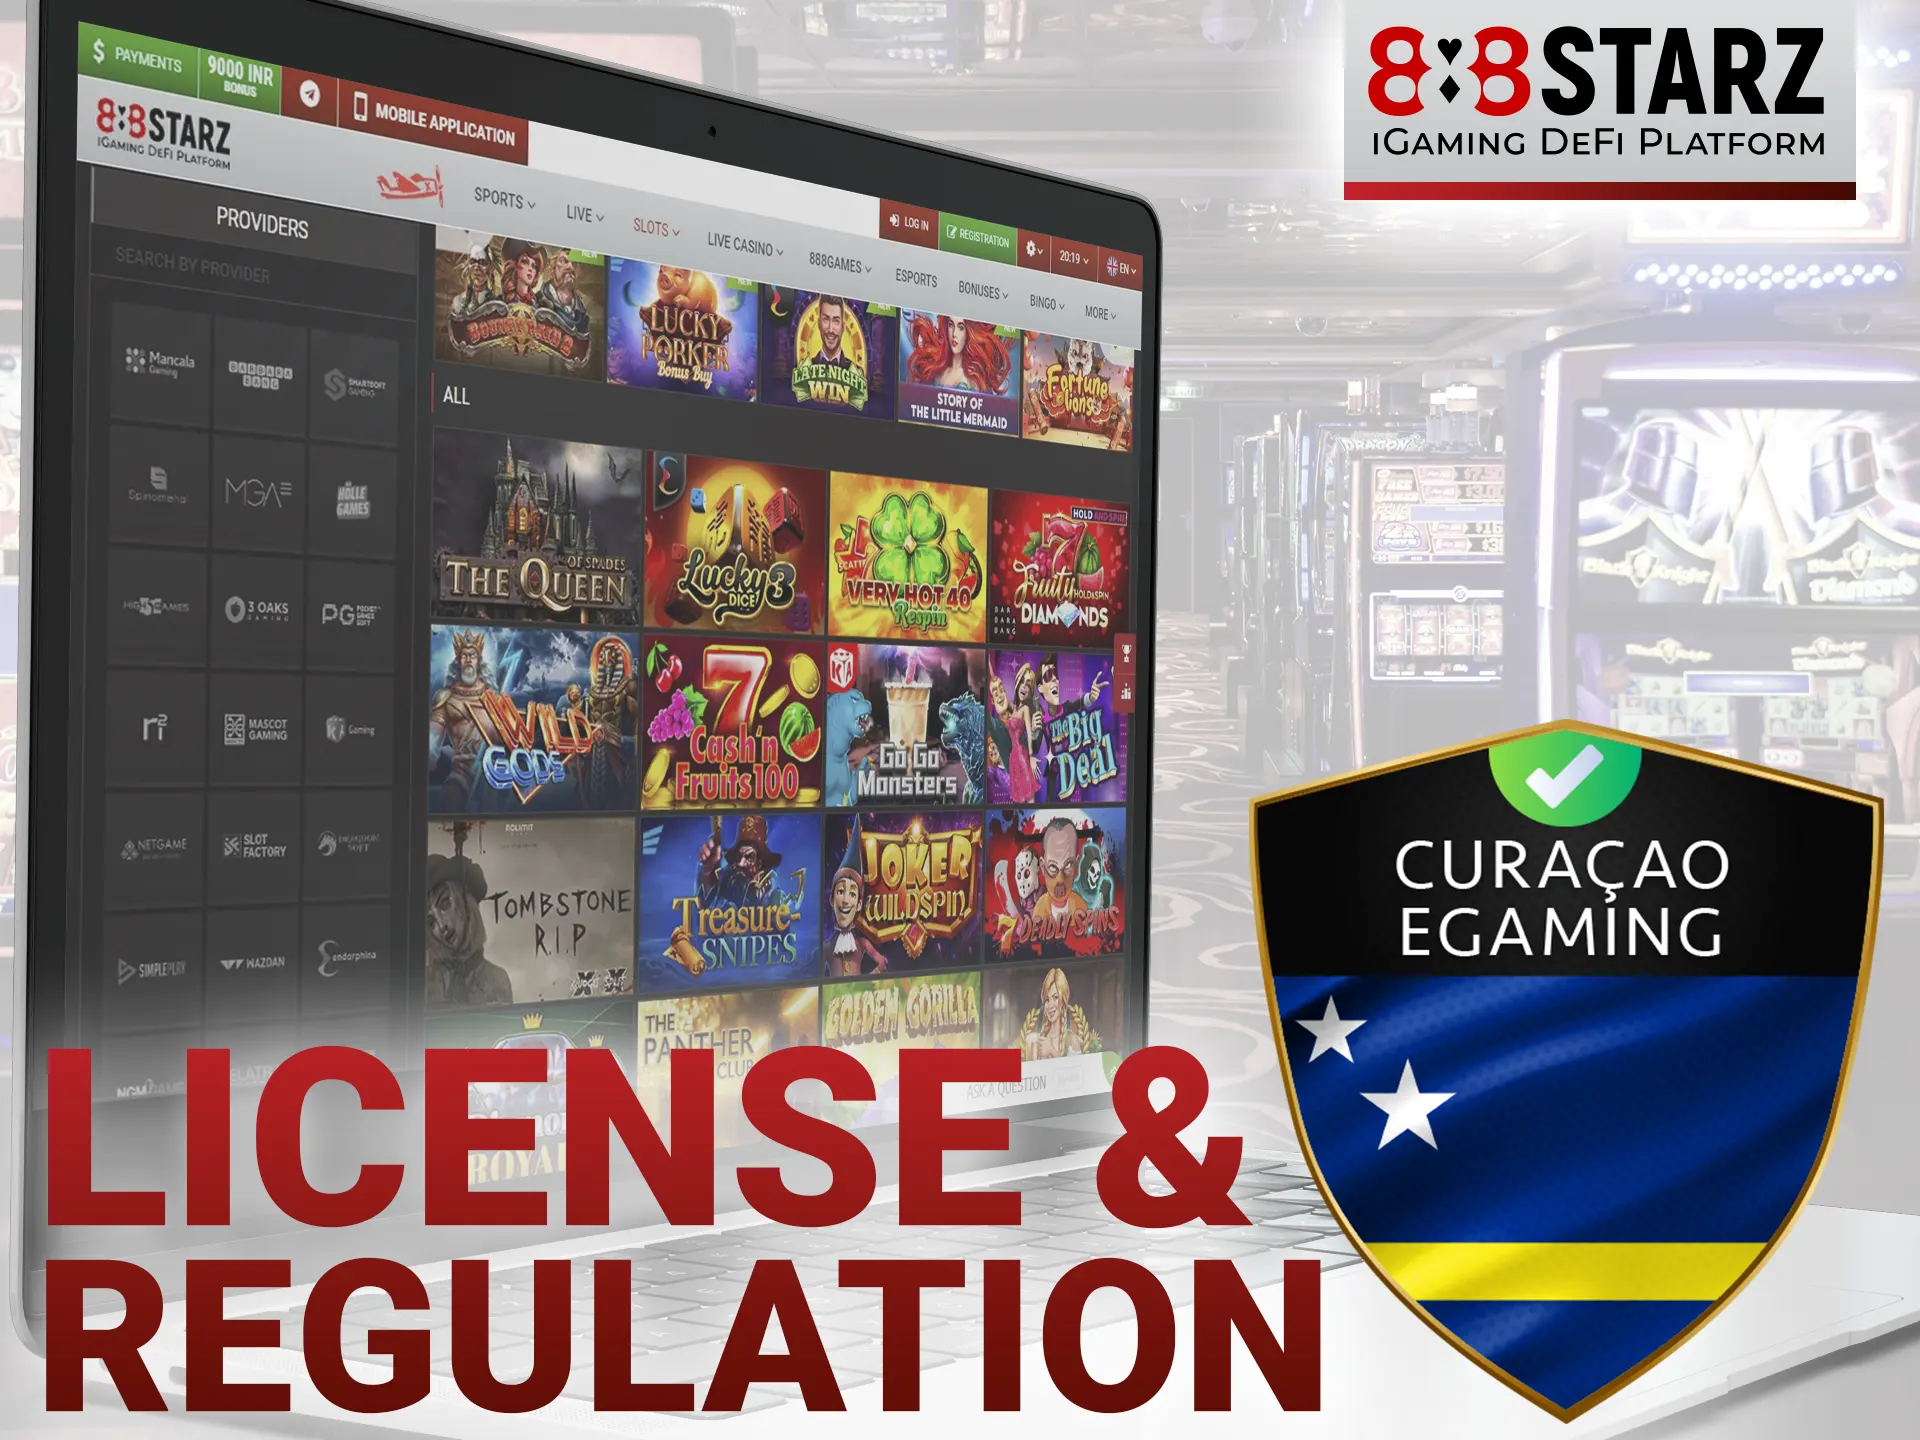 888starz online casino is licensed by Curaсao.